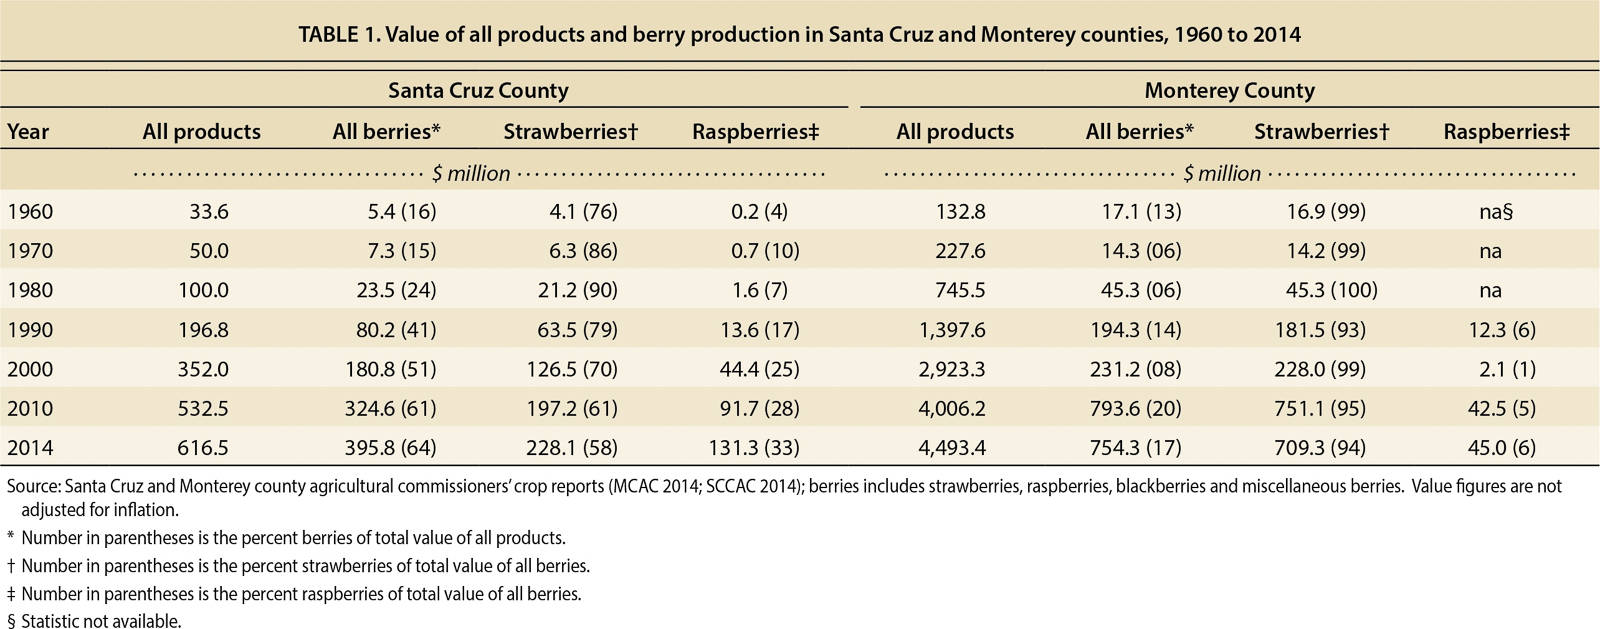 Value of all products and berry production in Santa Cruz and Monterey counties, 1960 to 2014